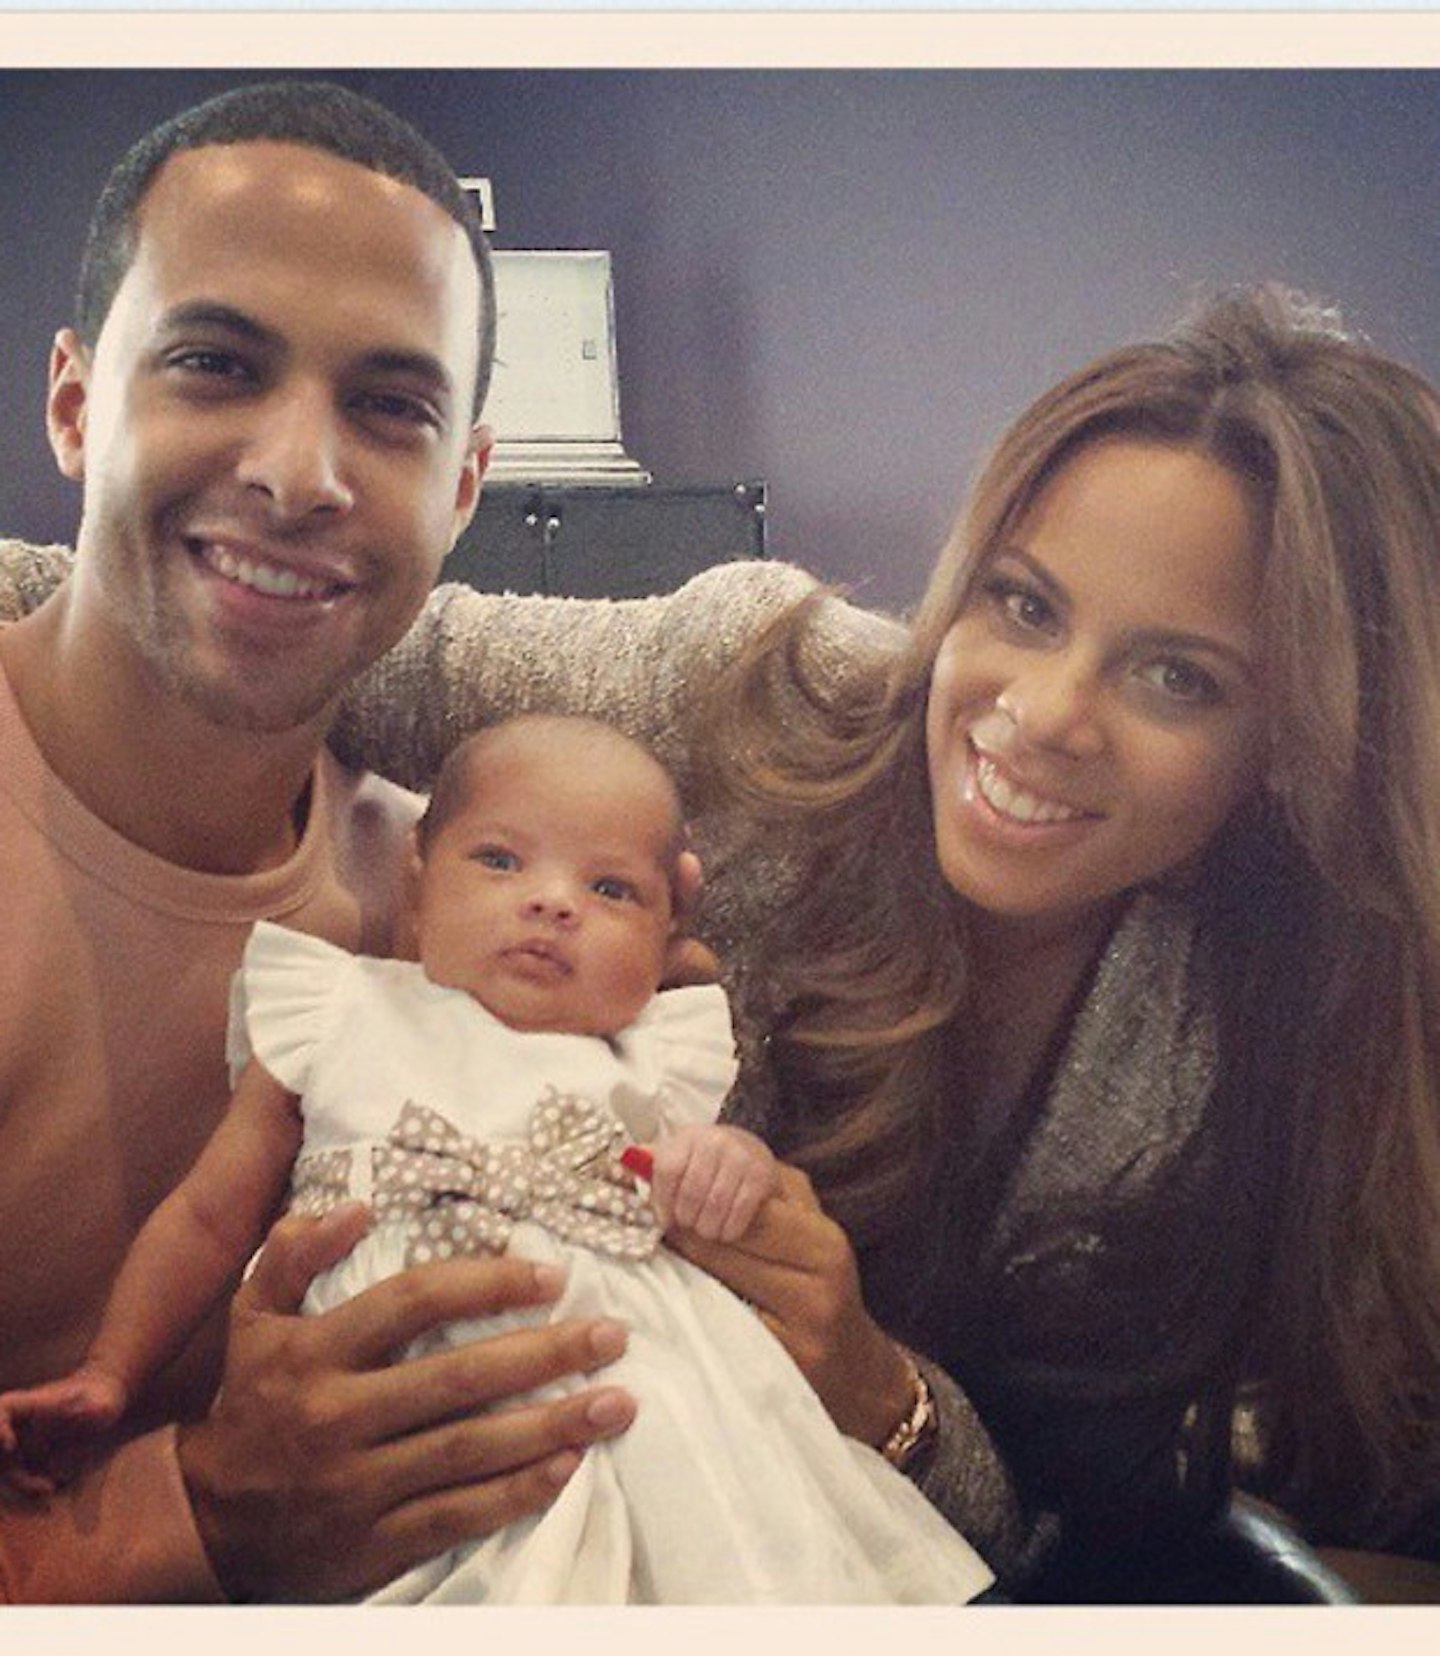 rochelle-wiseman-marvin-humes-baby-daughter-alaia-mai